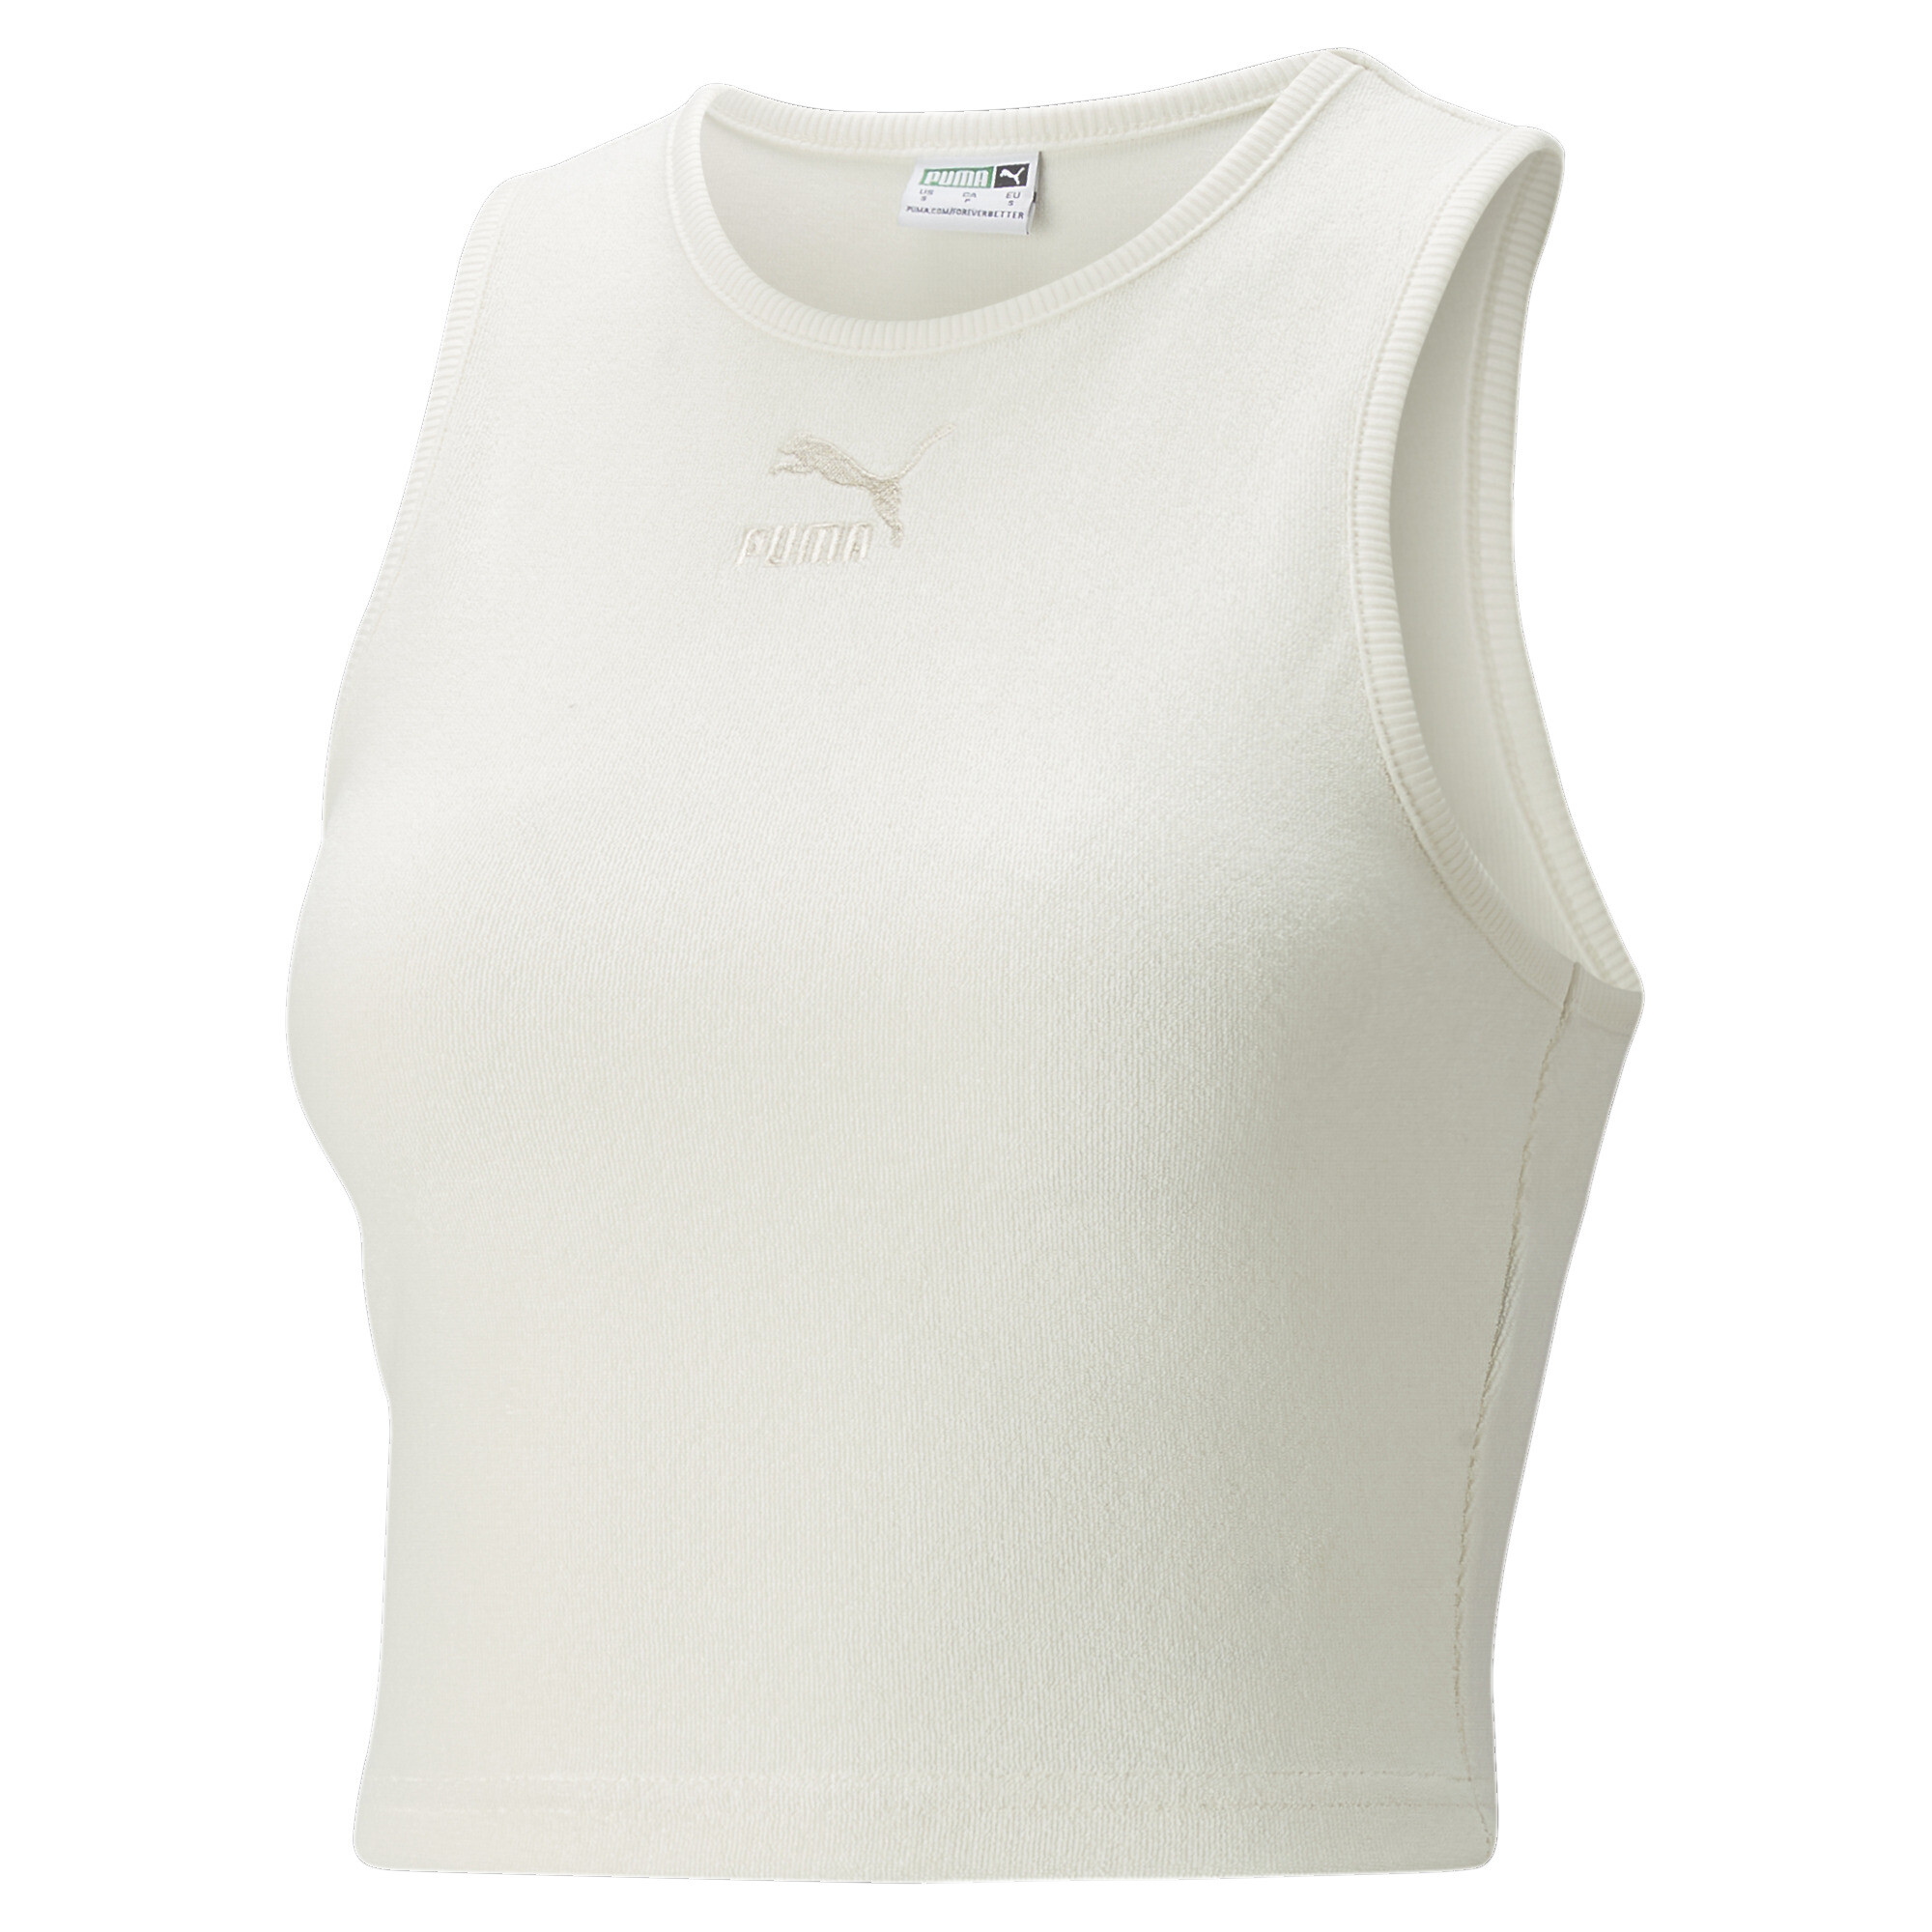 Women's Puma Classics Towelling Crop Top, White, Size S, Clothing